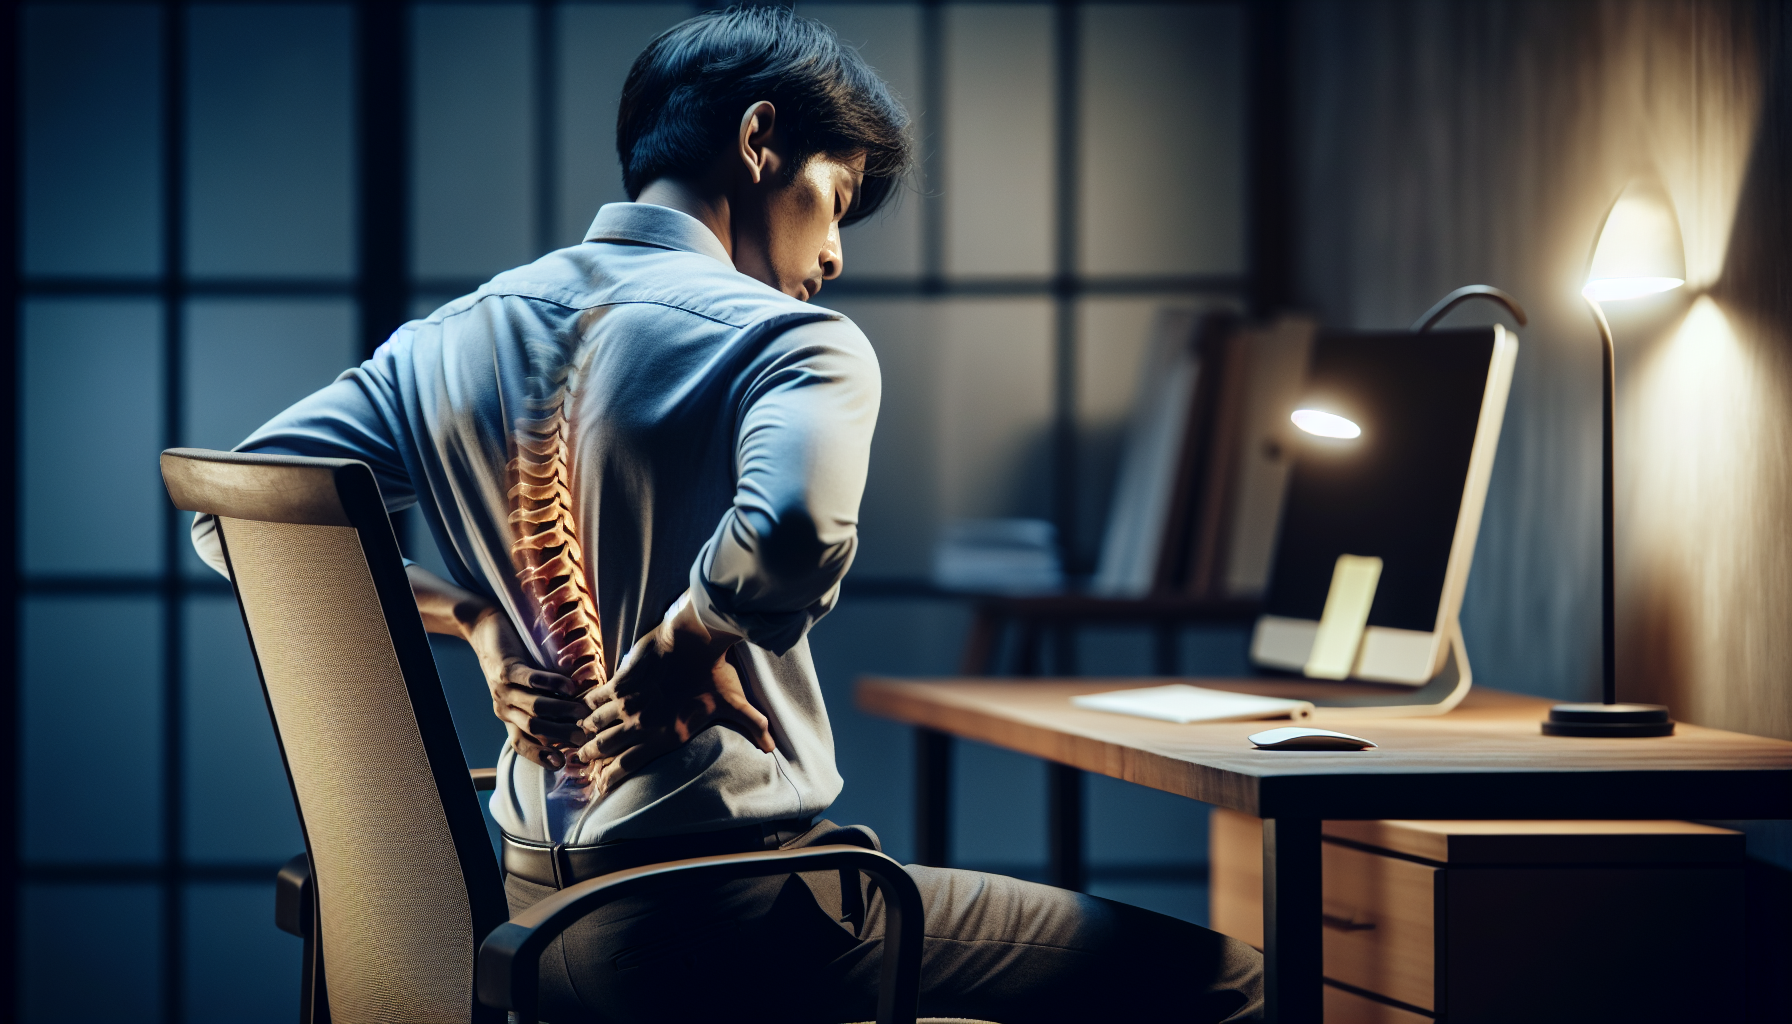 Person with poor posture causing strain on the spine